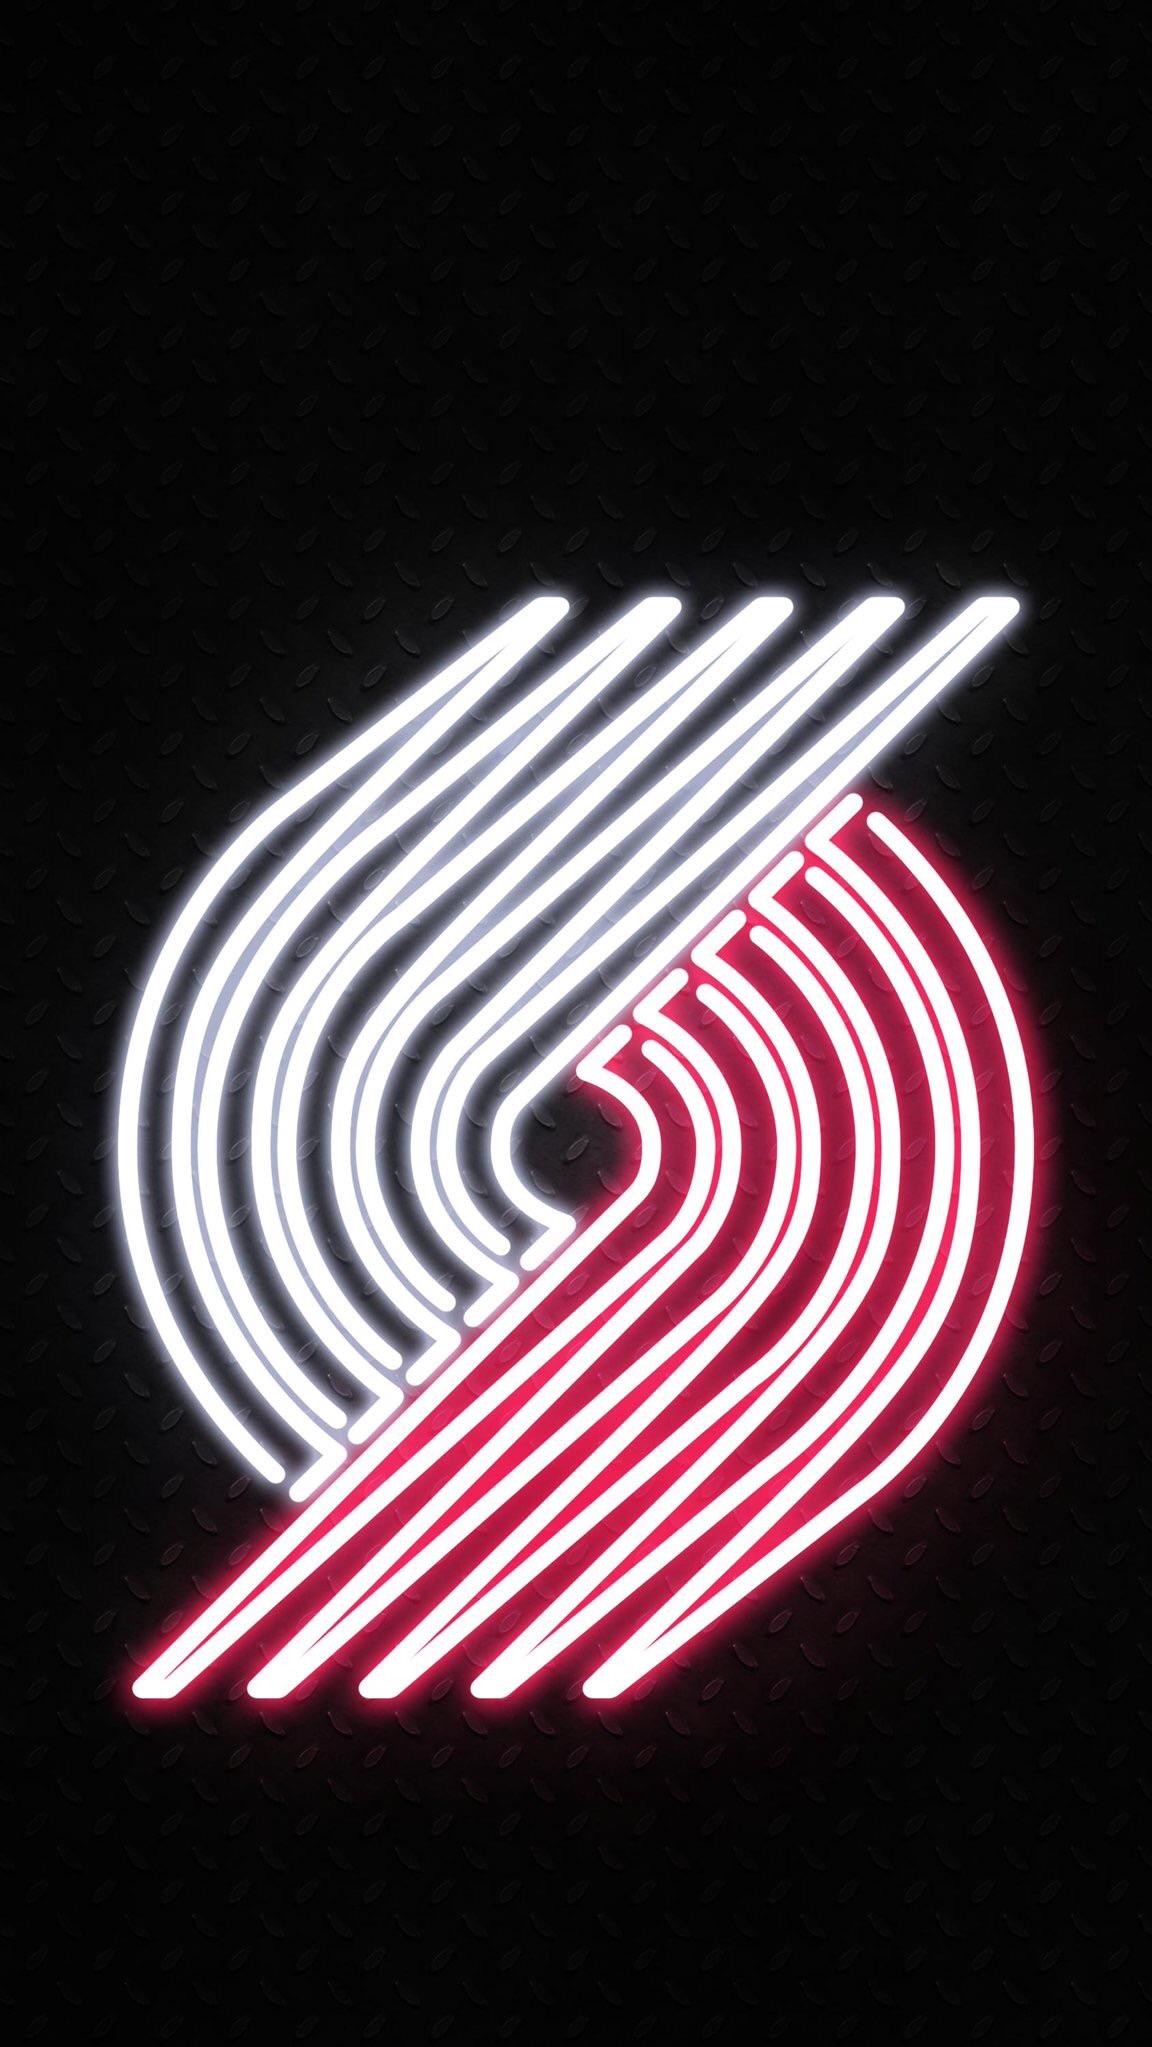 Rip City Wallpaper (best Rip City Wallpaper and image) on WallpaperChat